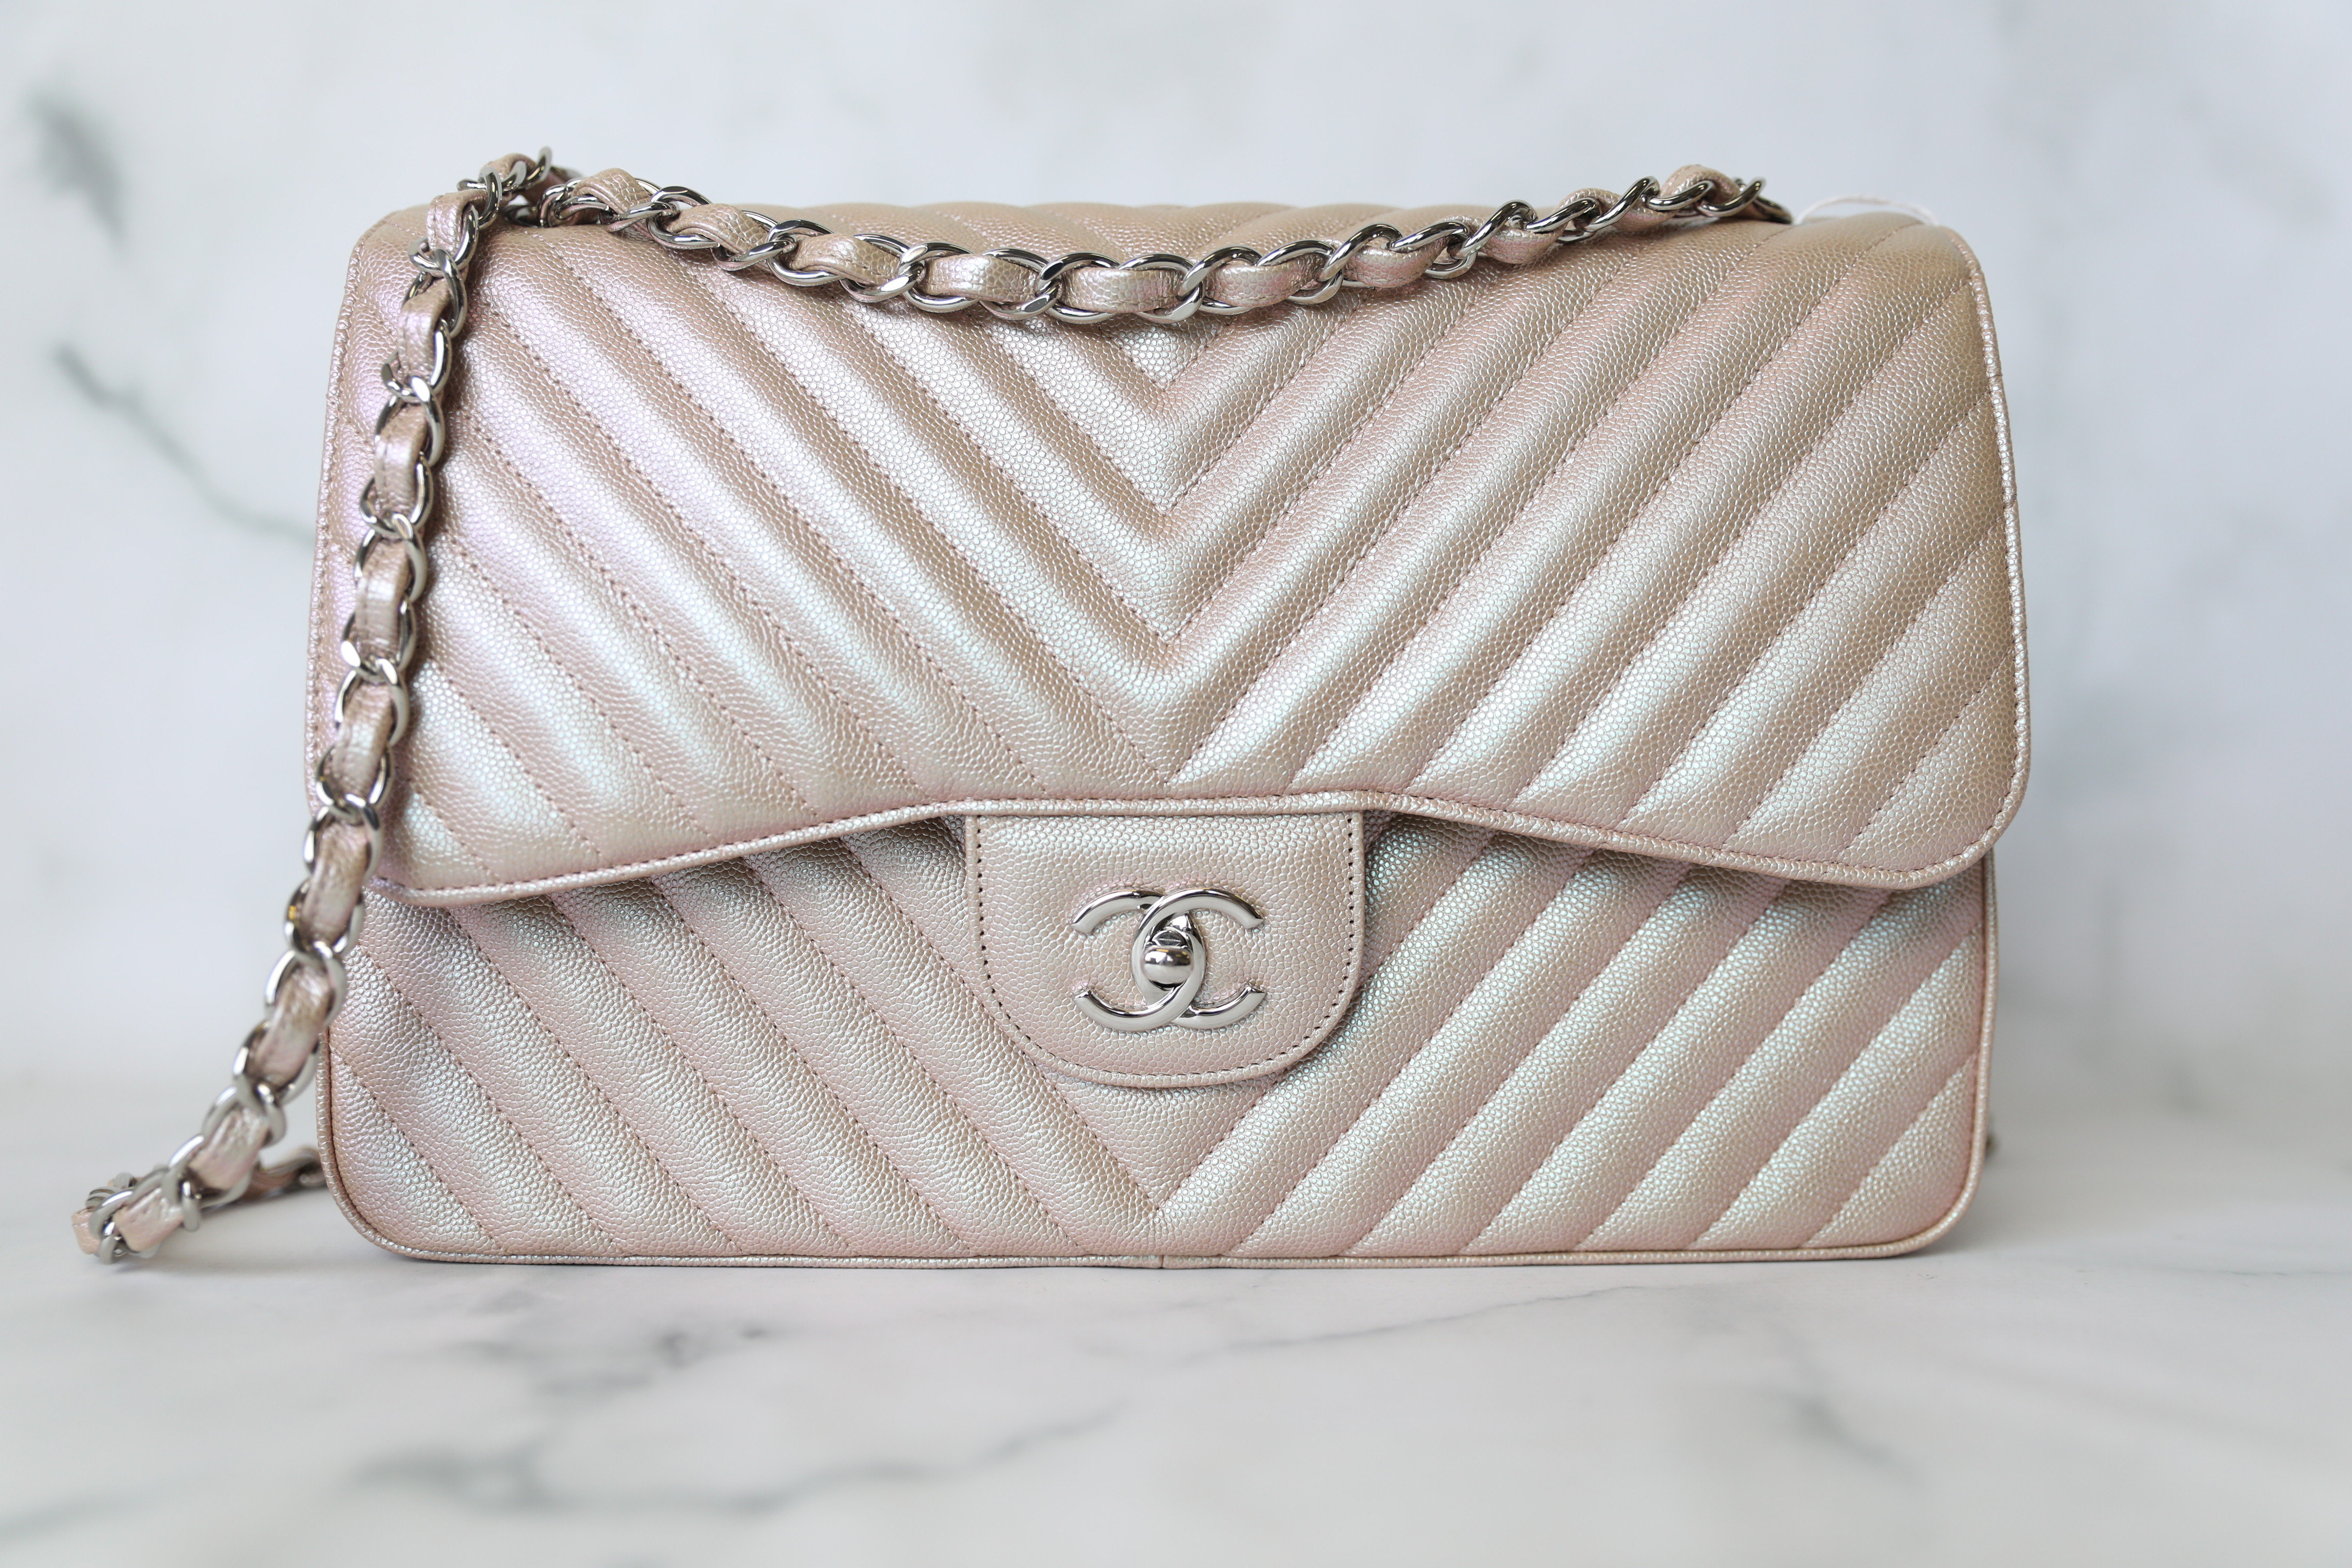 Chanel Classic Jumbo, 17B Iridescent Rose Gold Caviar with Silver Hardware,  As New in Box WA001